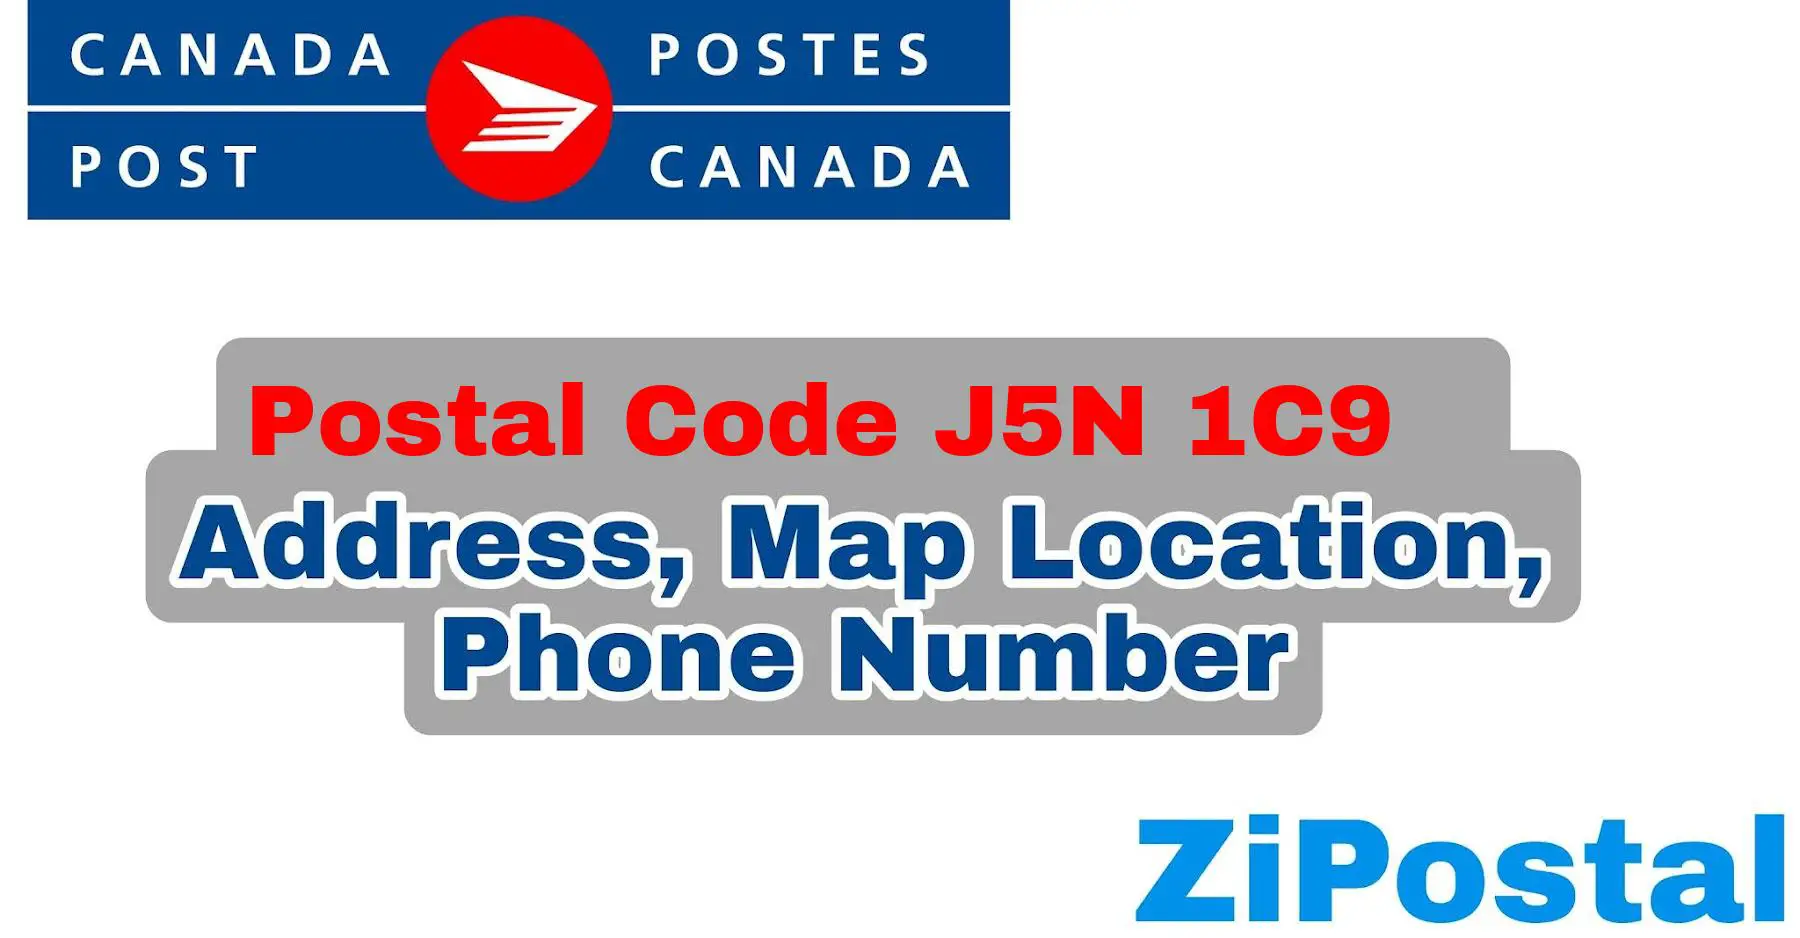 Postal Code J5N 1C9 Address Map Location and Phone Number